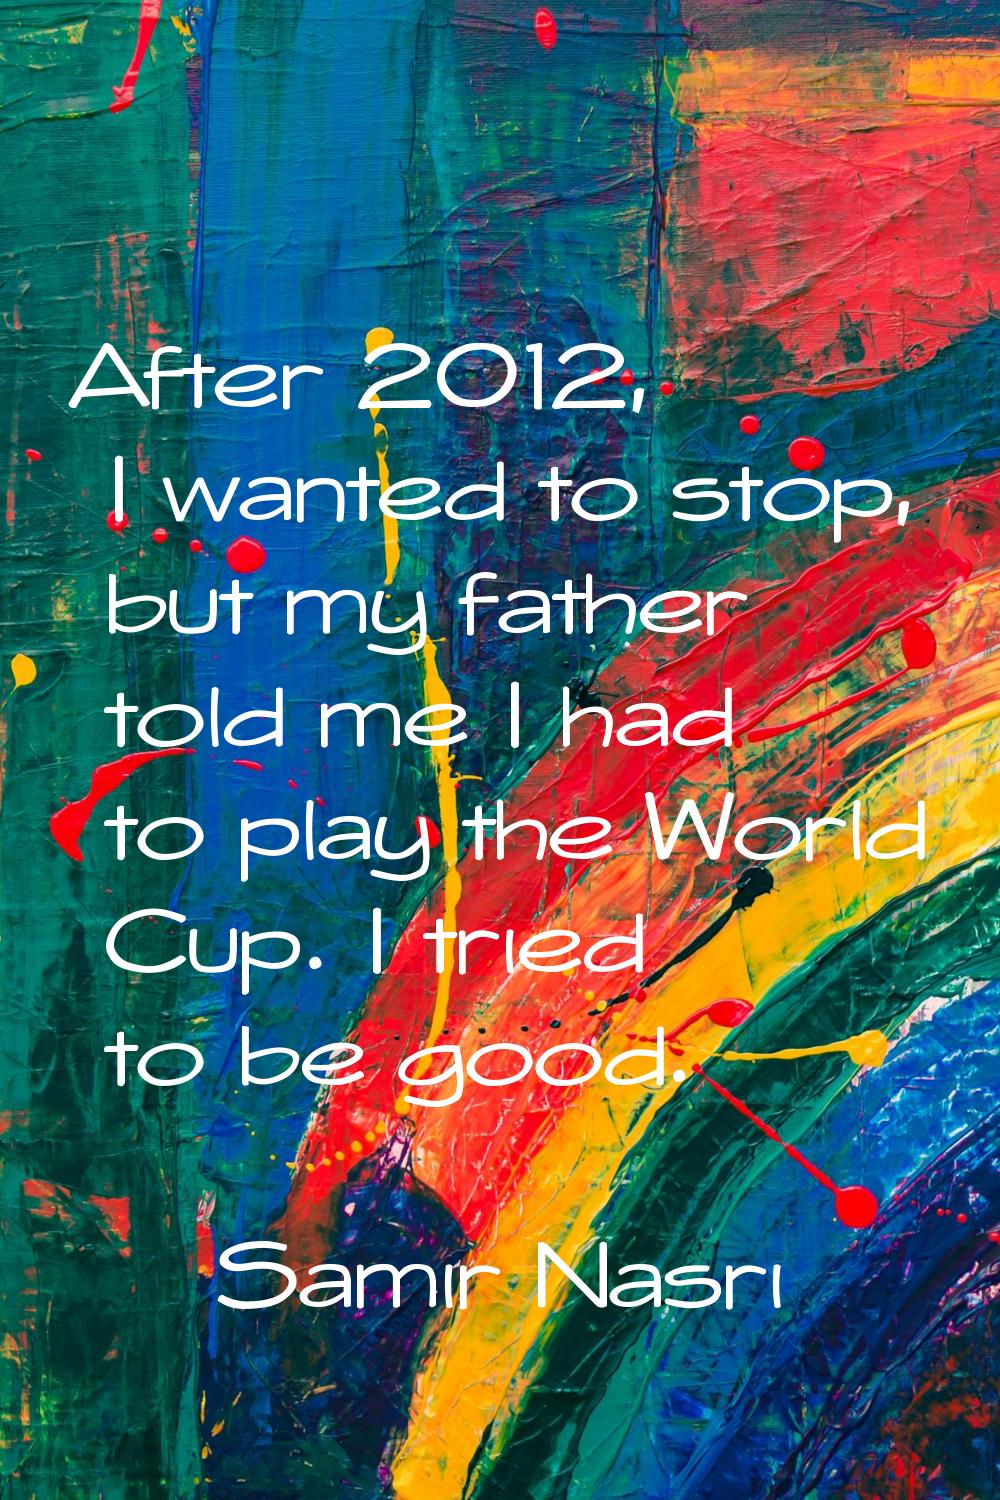 After 2012, I wanted to stop, but my father told me I had to play the World Cup. I tried to be good